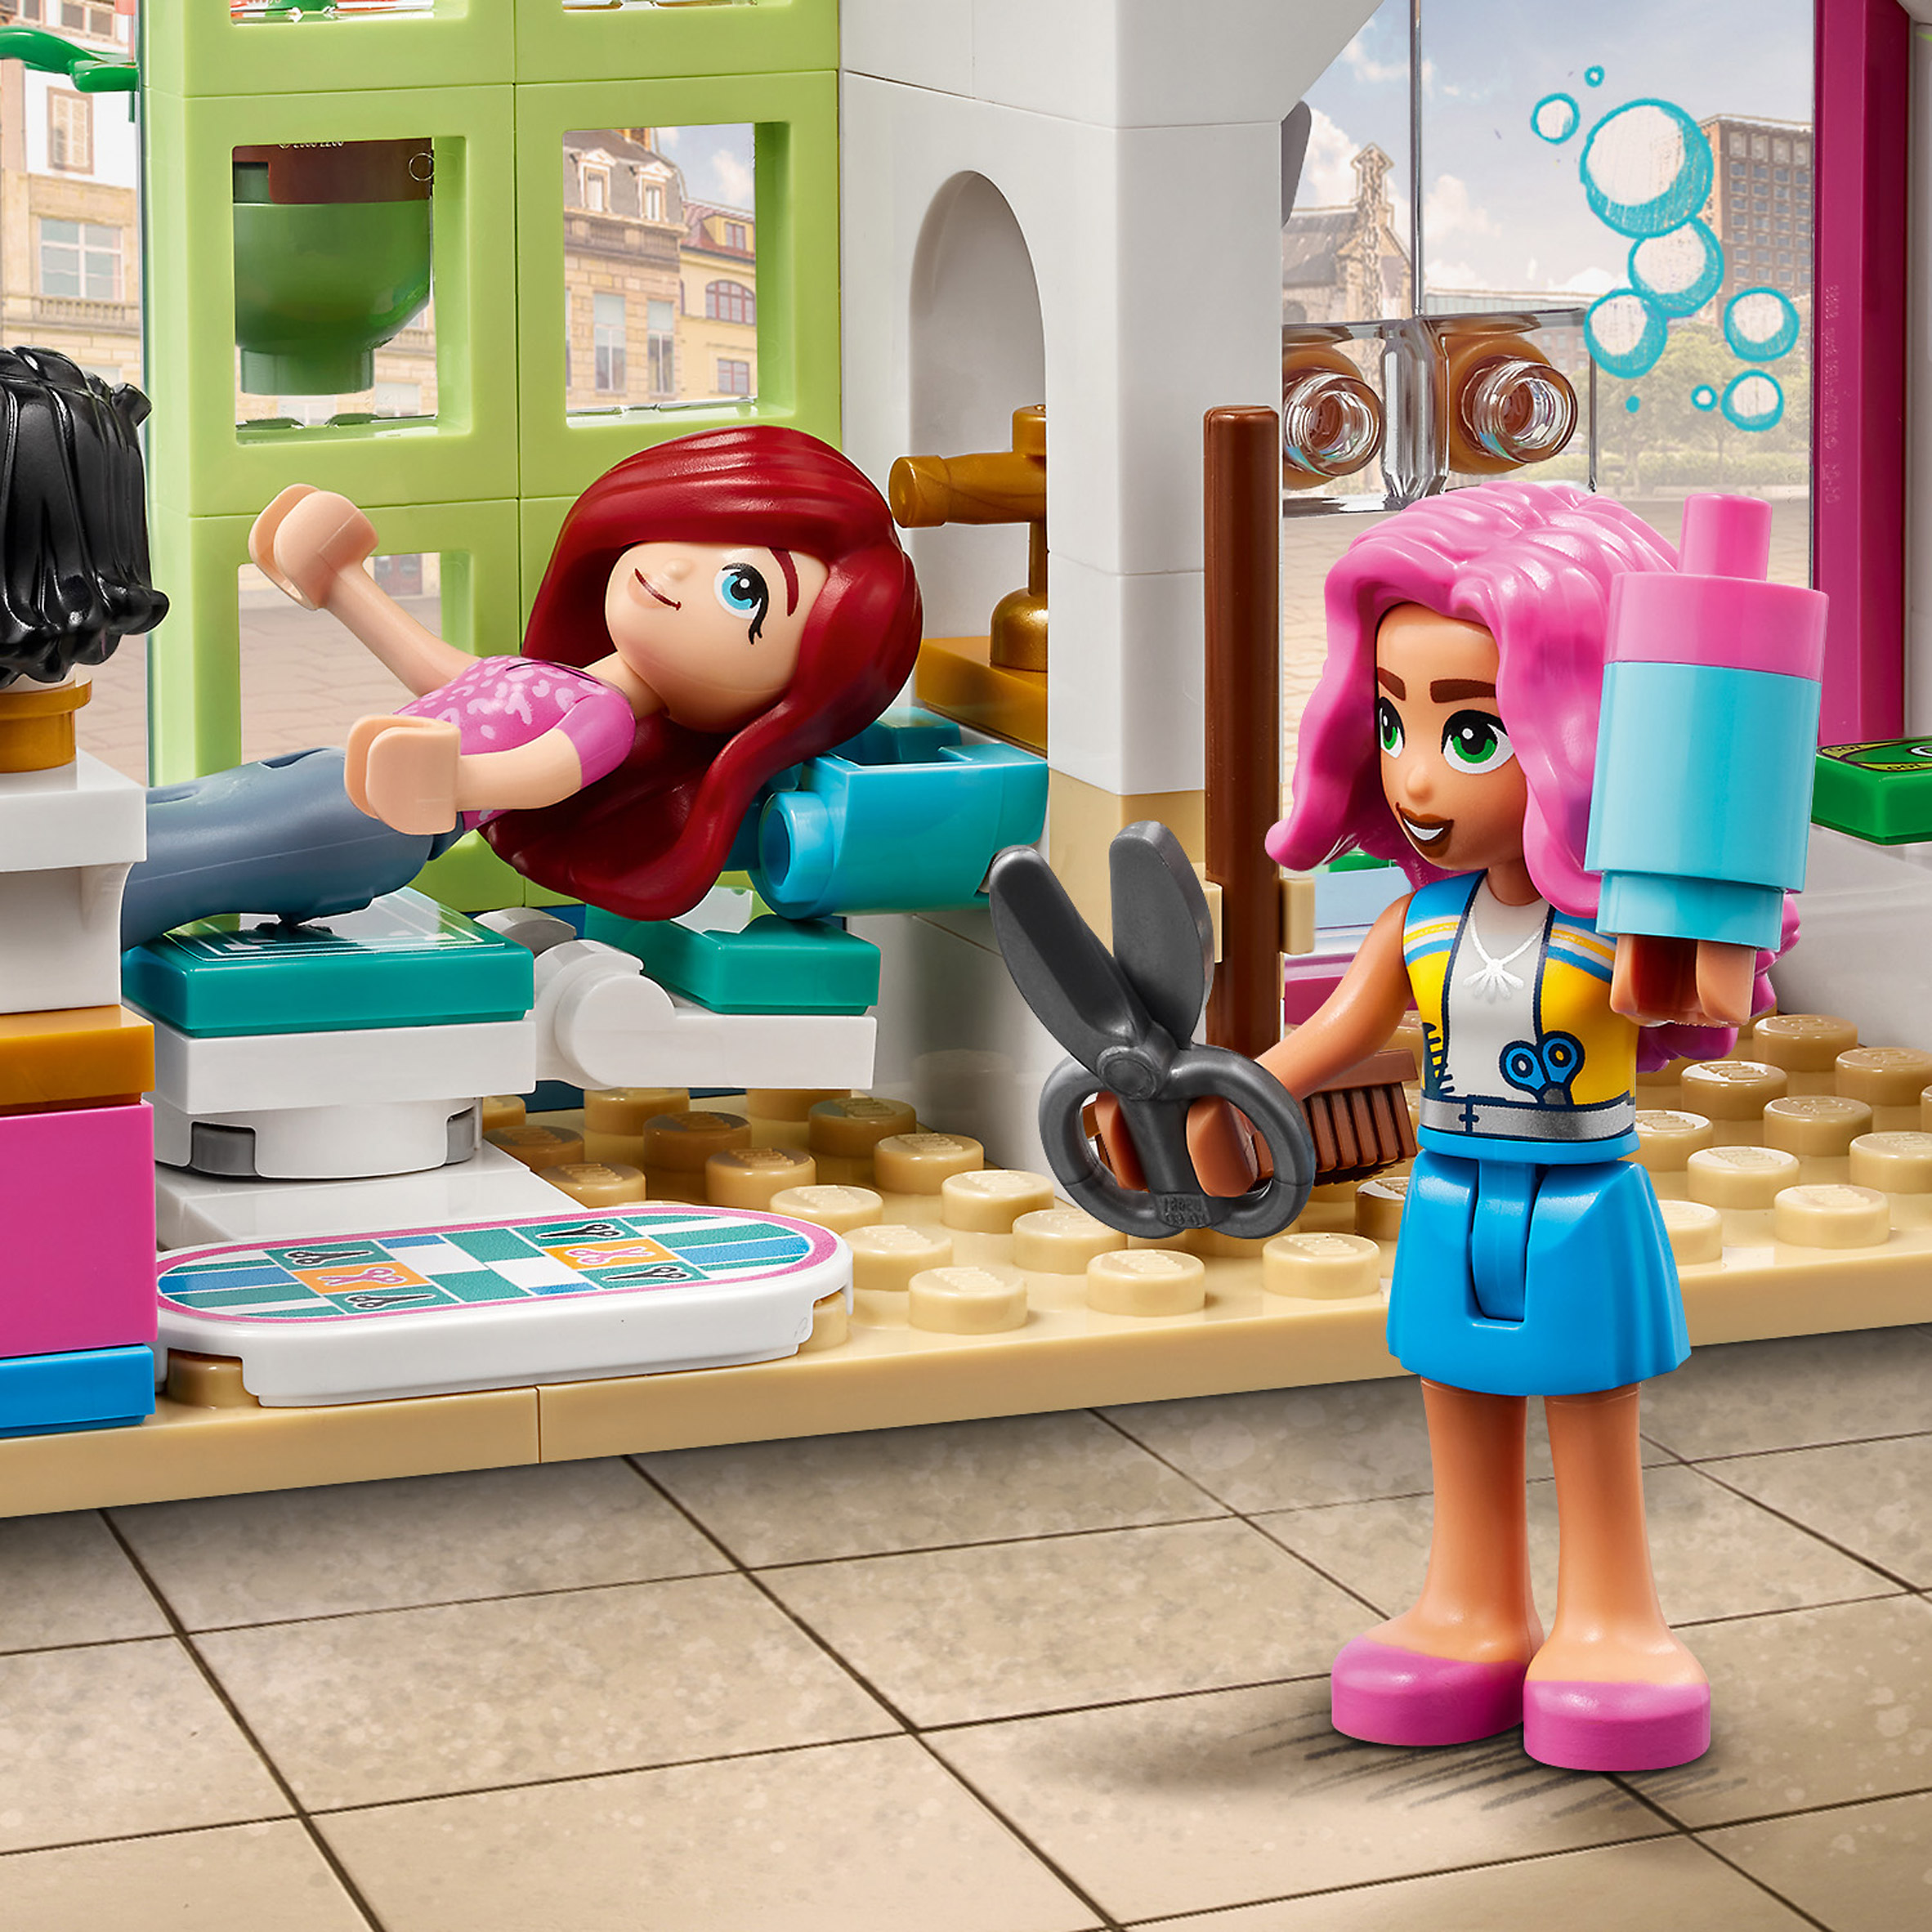 New LEGO Friends product line explores diversity and mental health